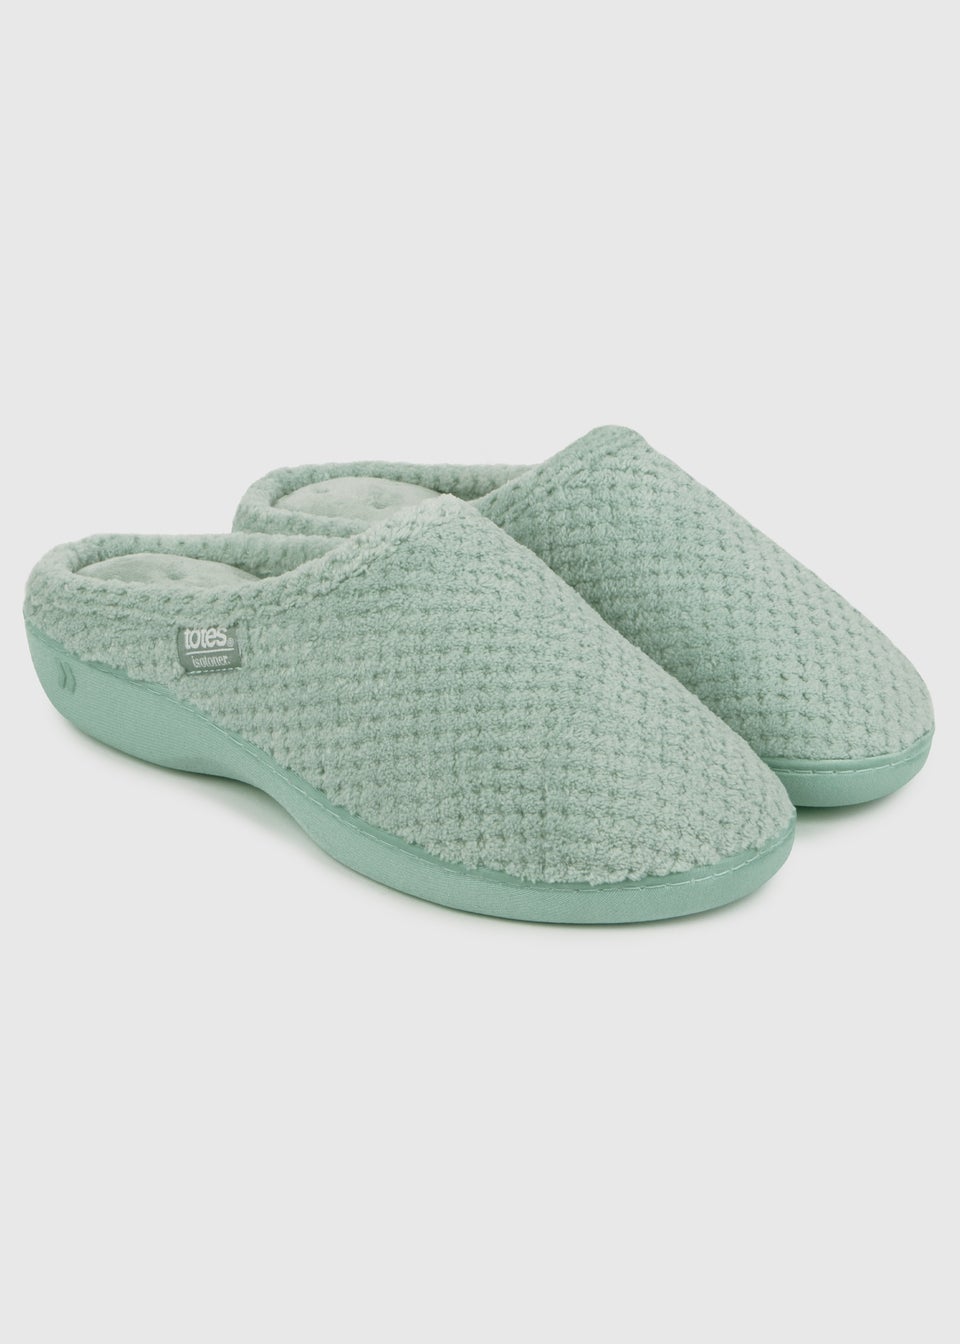 Totes Isotoner Mint Popcorn Terry Mule Slippers